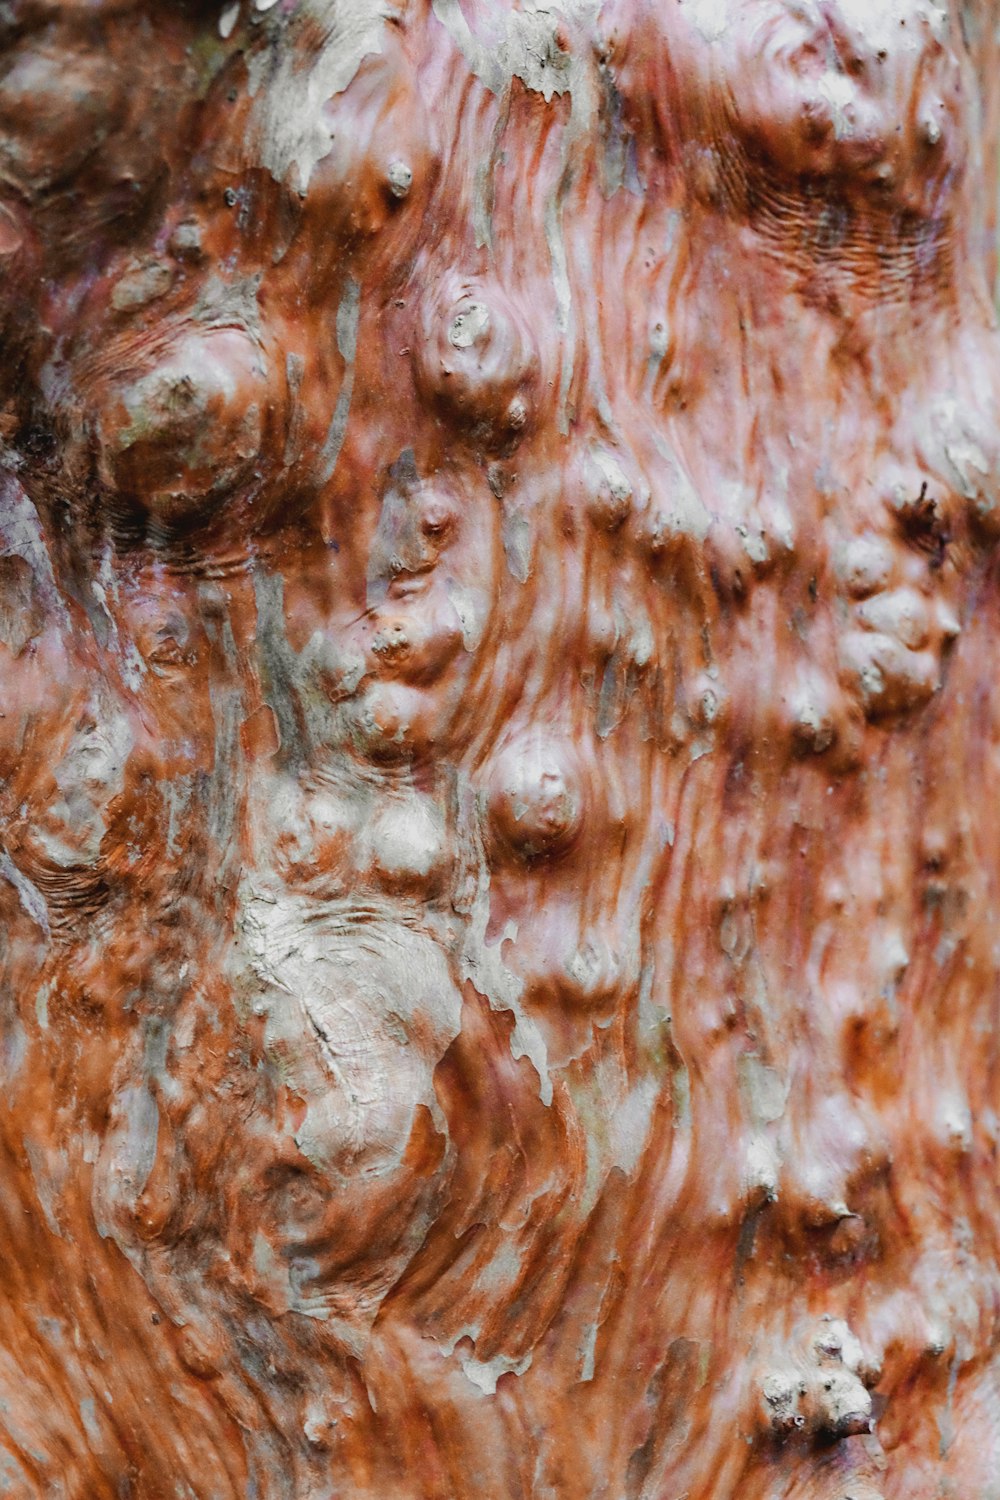 a close up of a tree trunk showing the bark